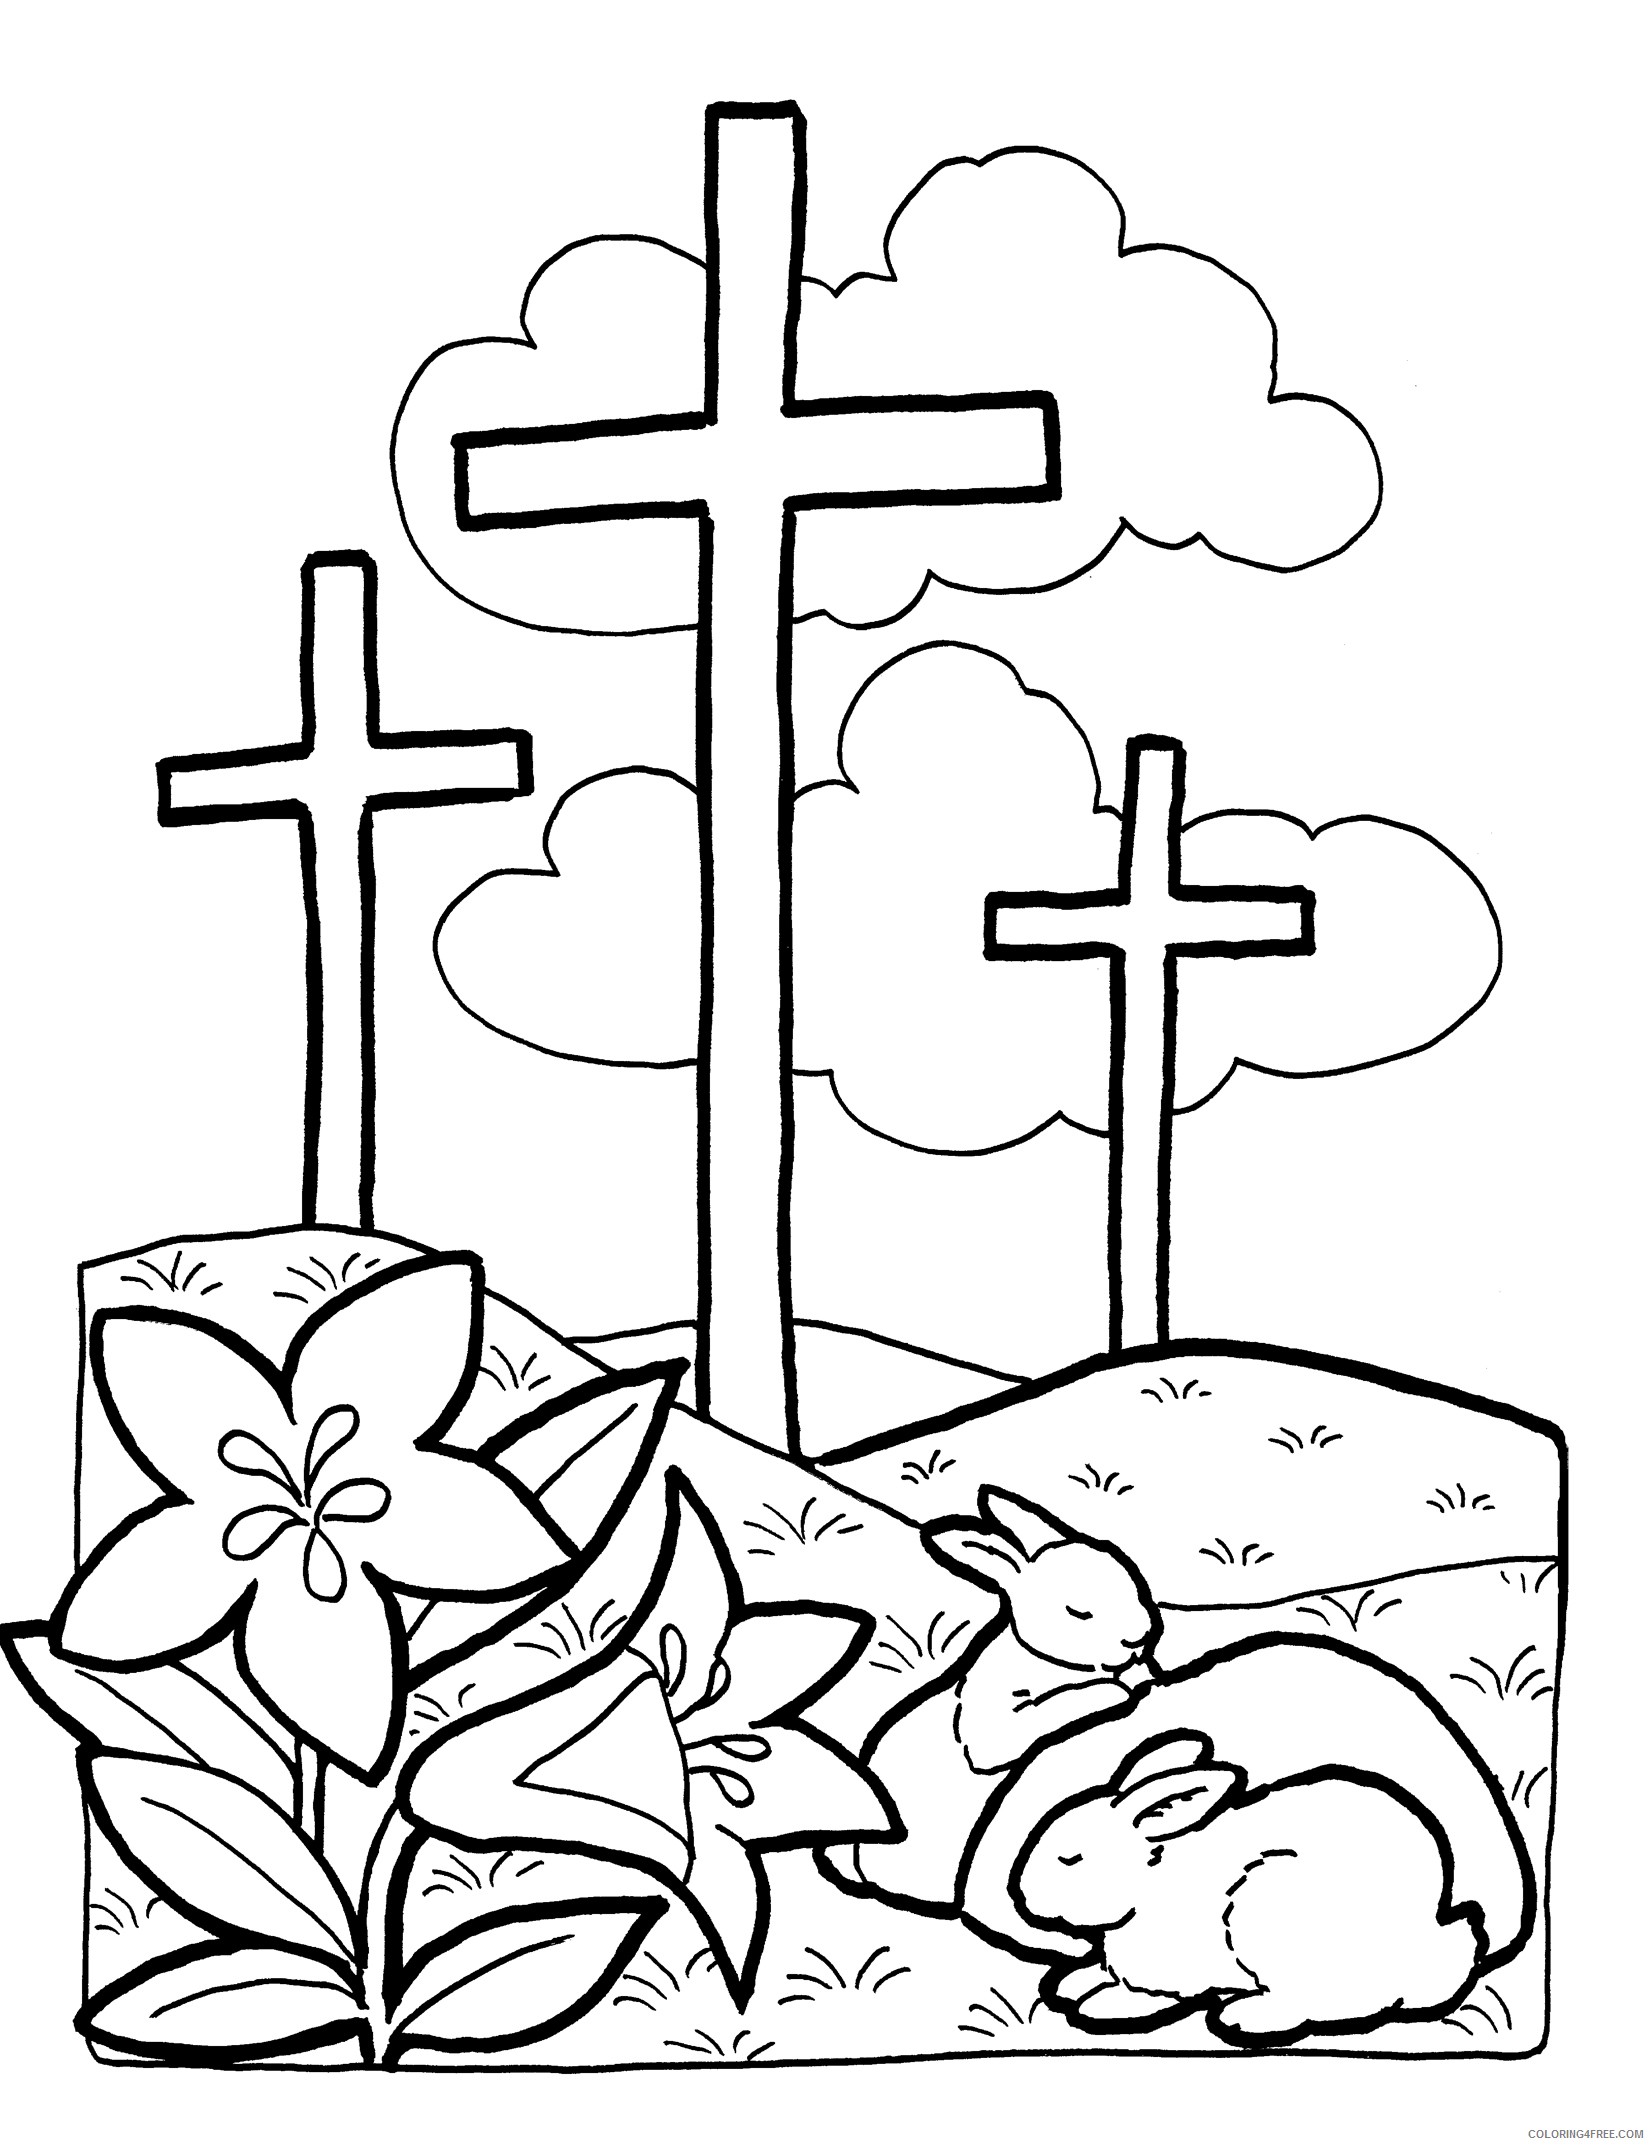 Printable Cross Coloring Pages For Kids Coloring4free Coloring4free Com